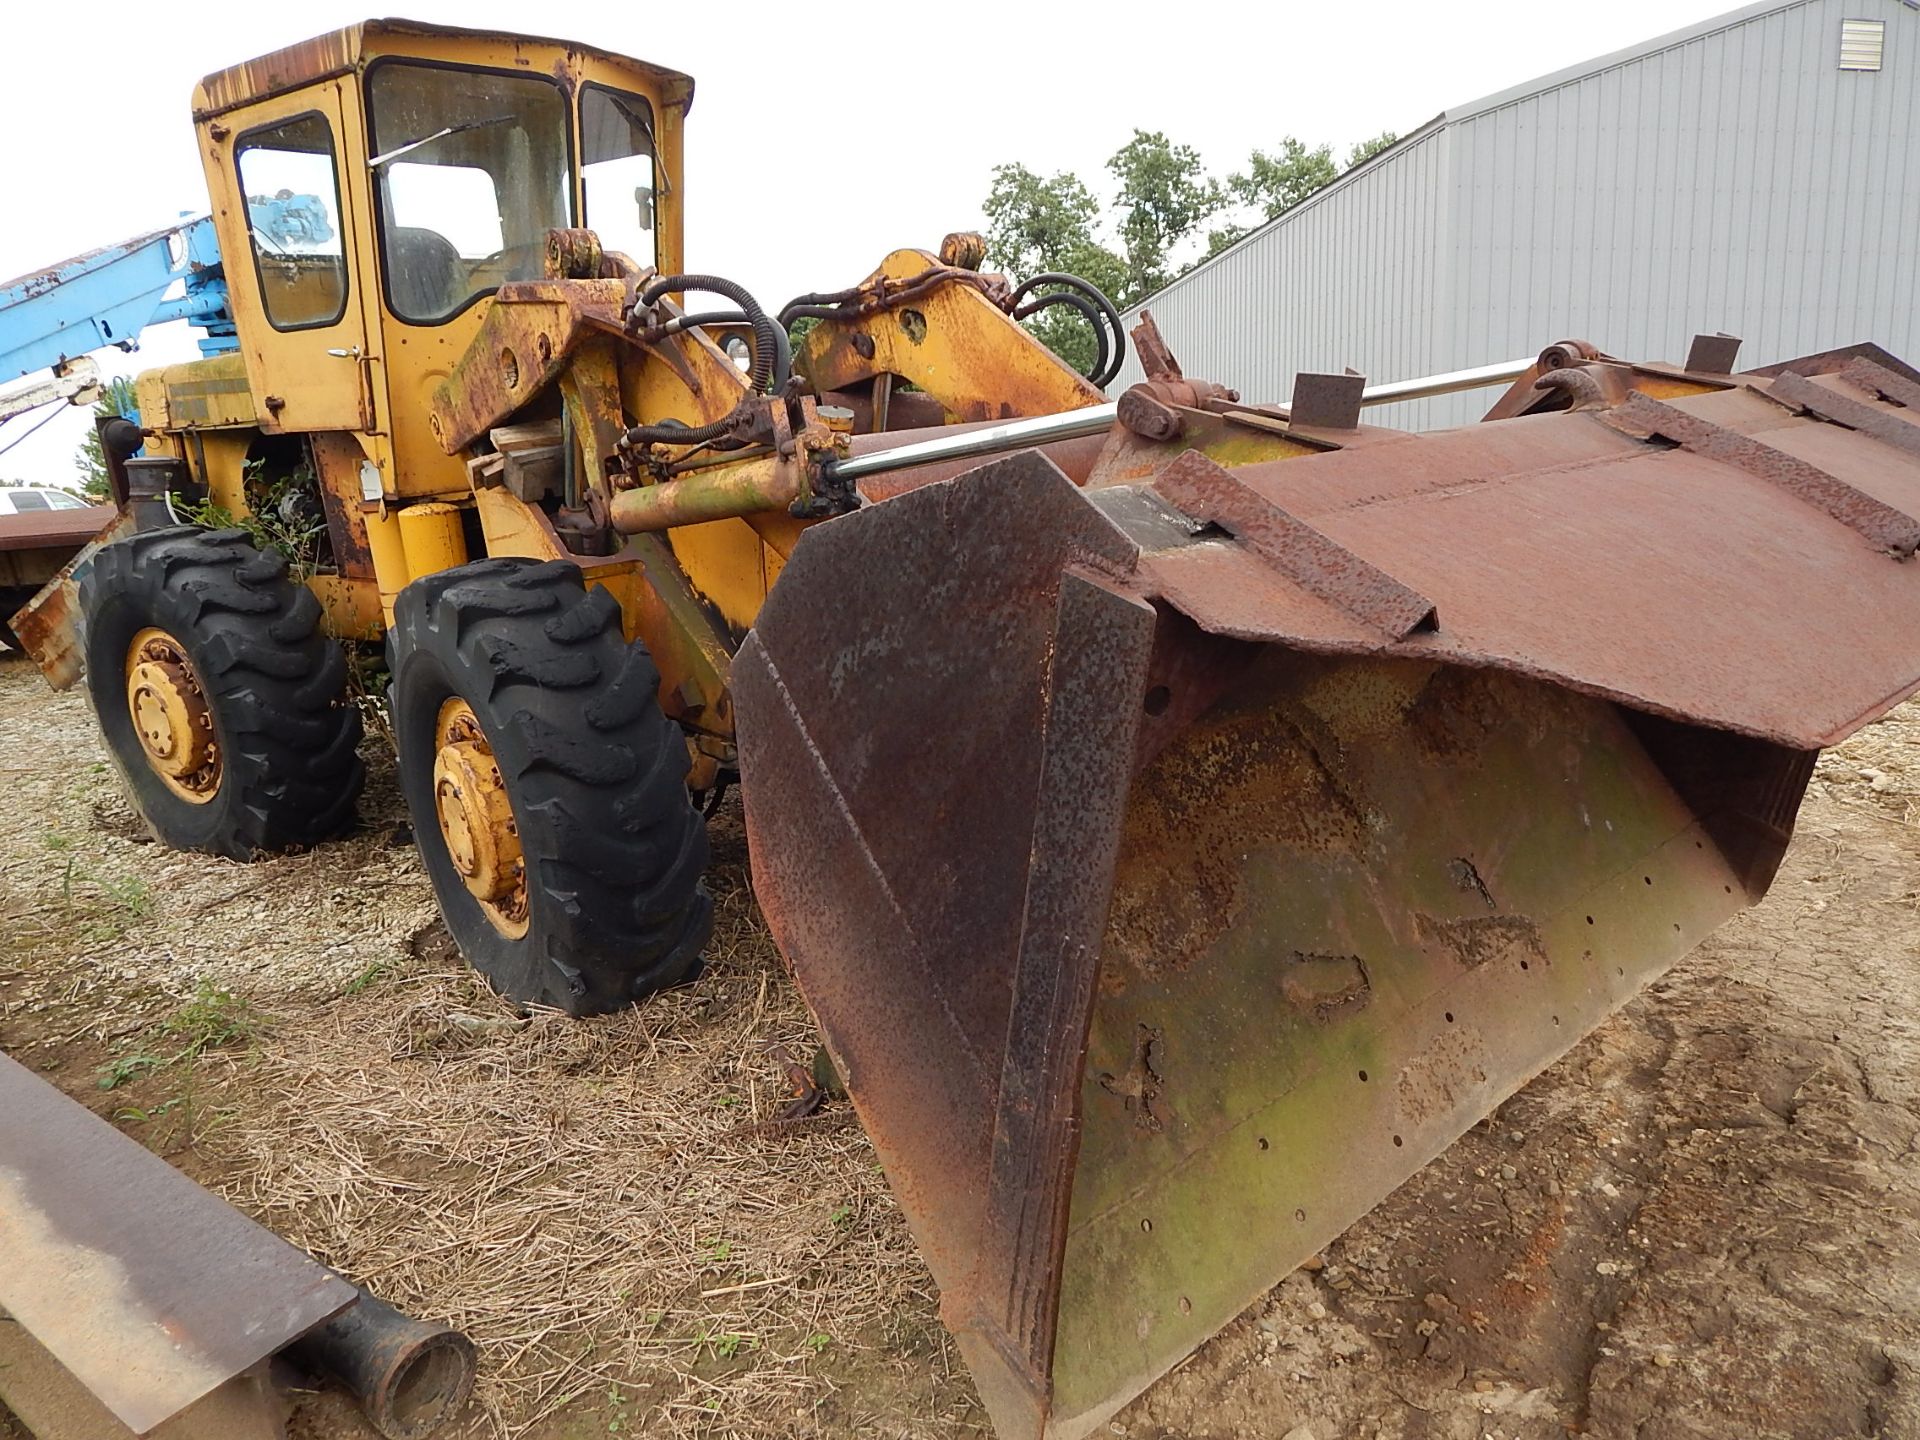 Terex/Euclid 72-30 Rubber Tired Loader, 8 ft Bucket, 2148 Hours, s/n 16UPM40248, Not in Service - Image 3 of 12